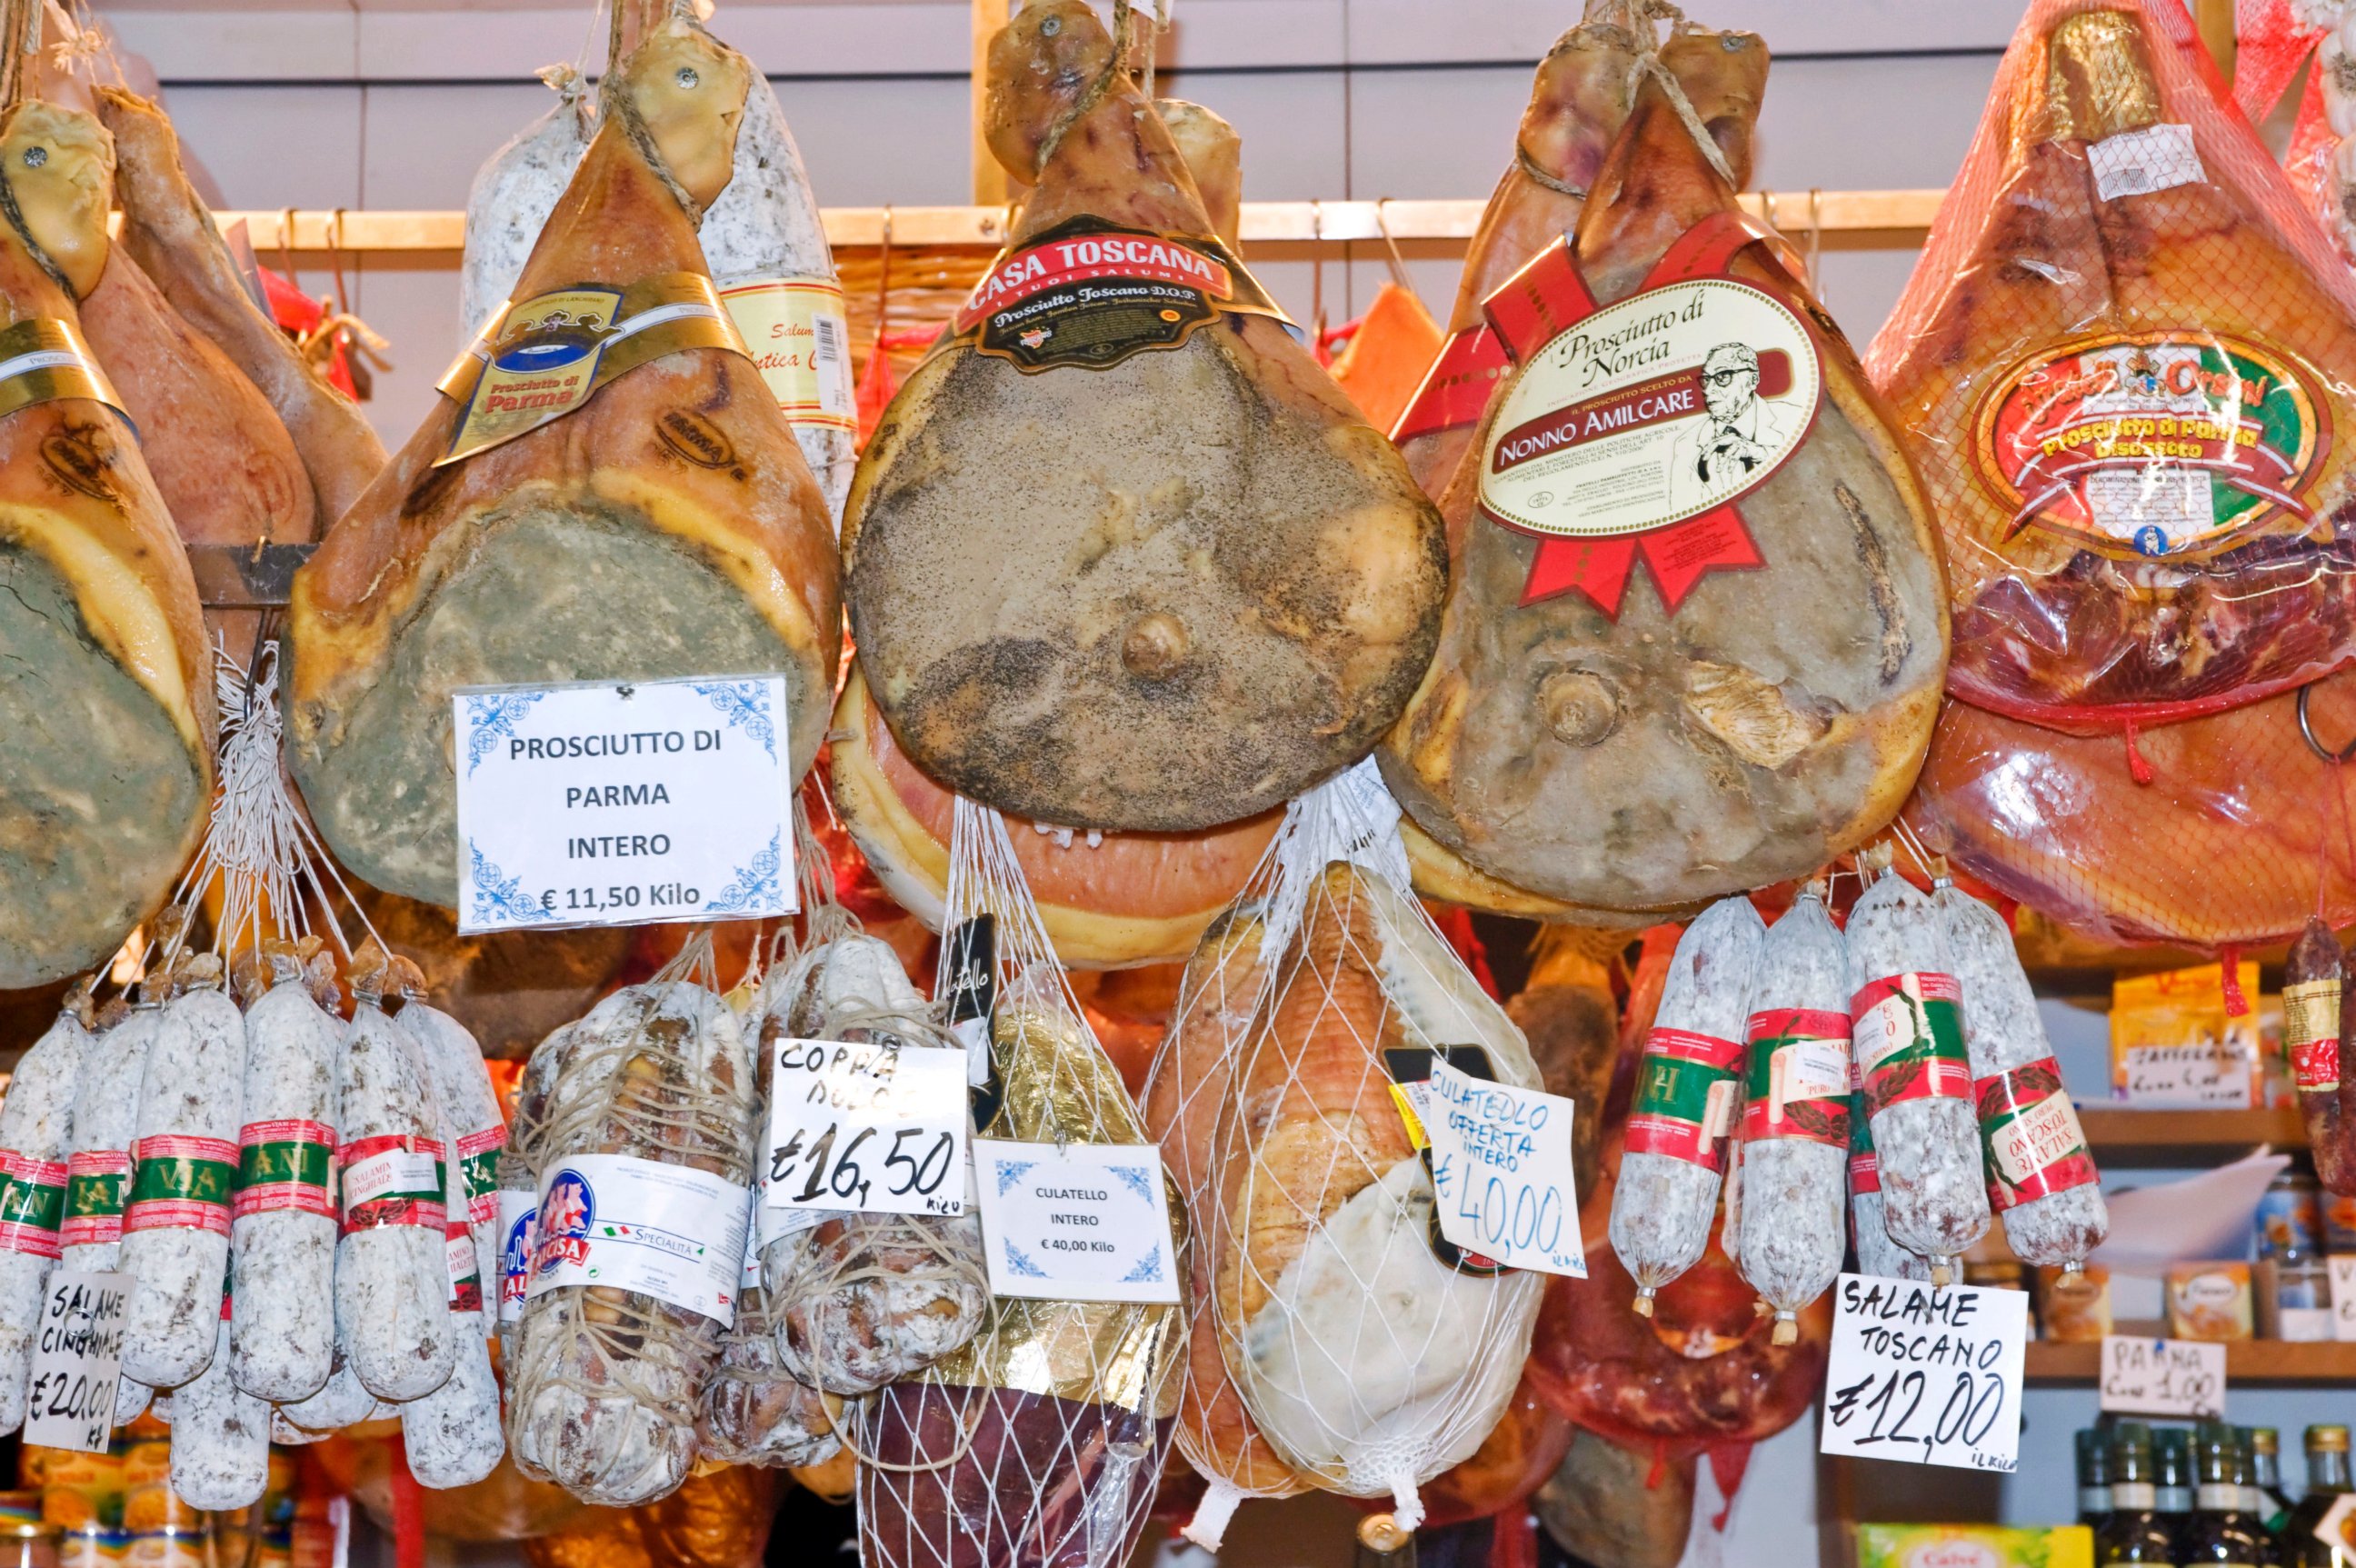 PHOTO: Prosciutto, hams, and salami for sale at a market in Florence, Italy.